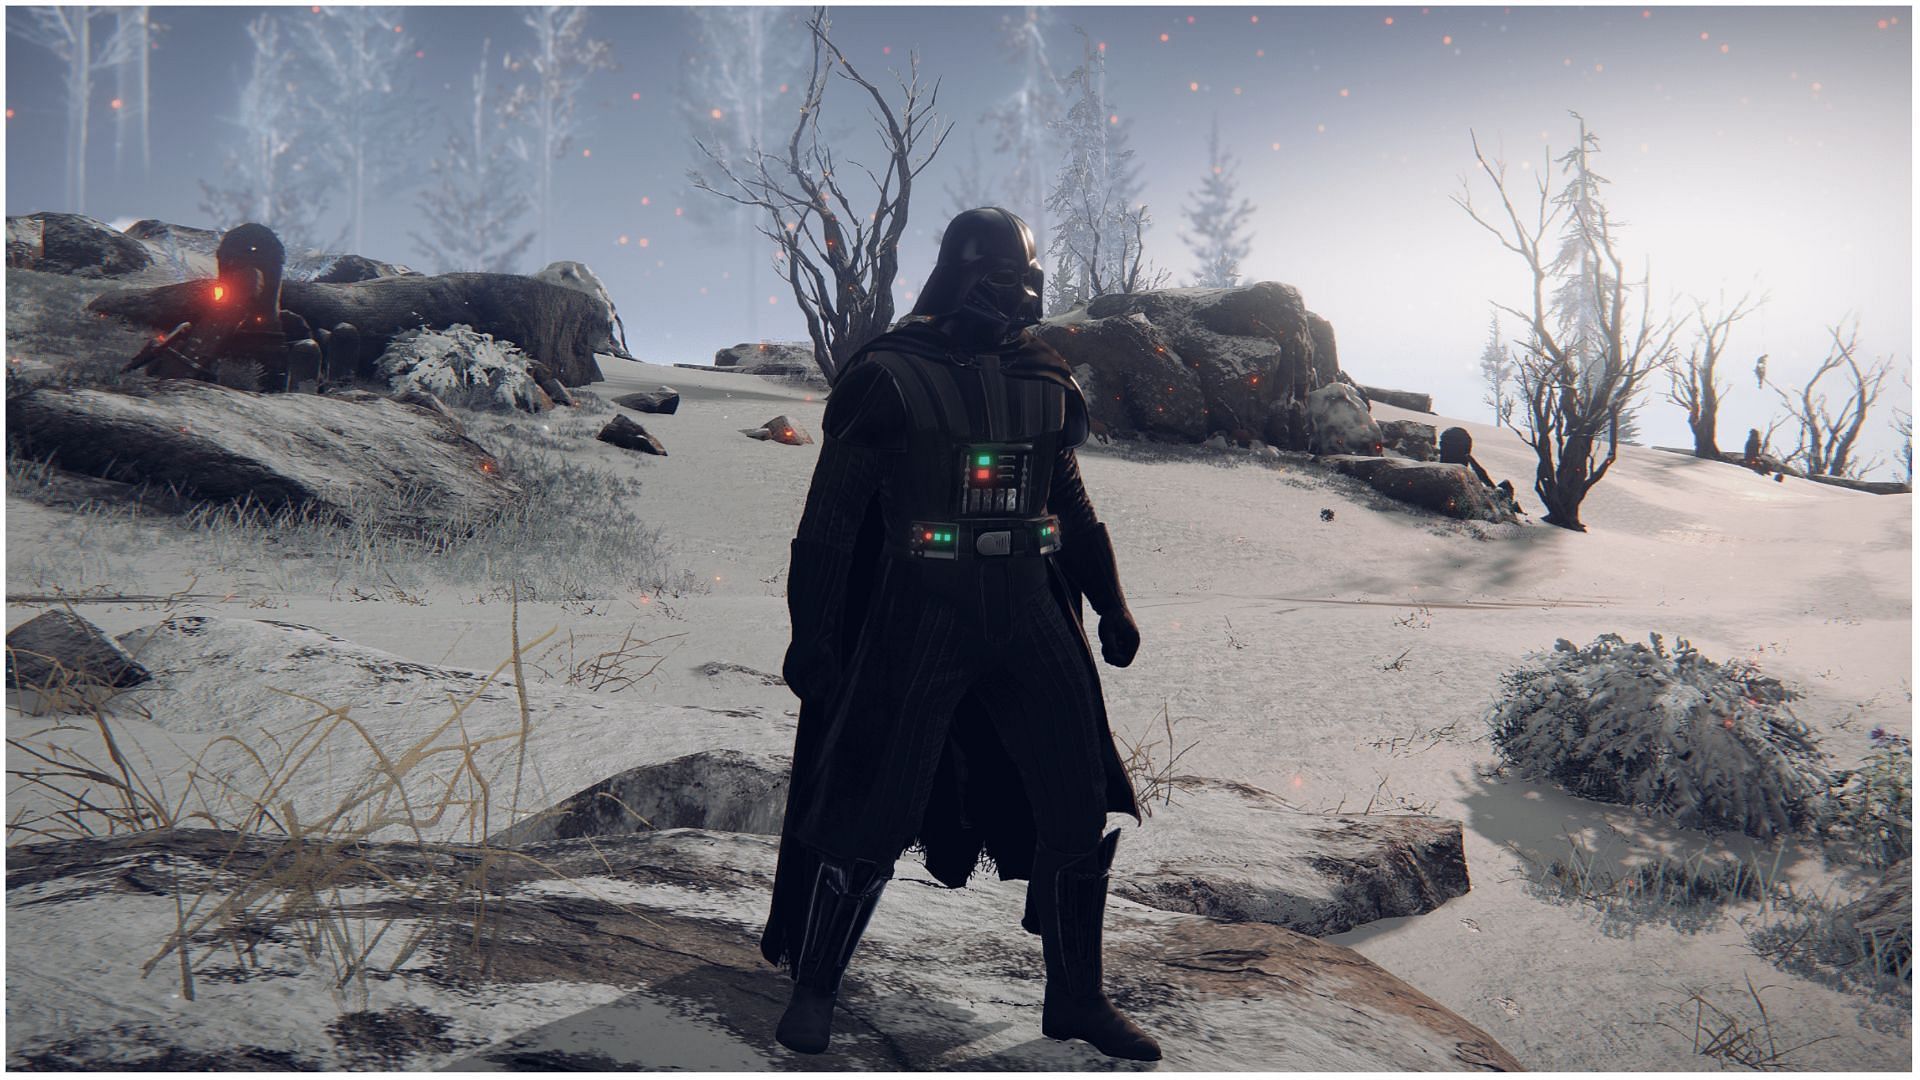 Elden Ring has a Darth Vader mod that lets players play as the iconic Star Wars villain (Image via FromSoftware)